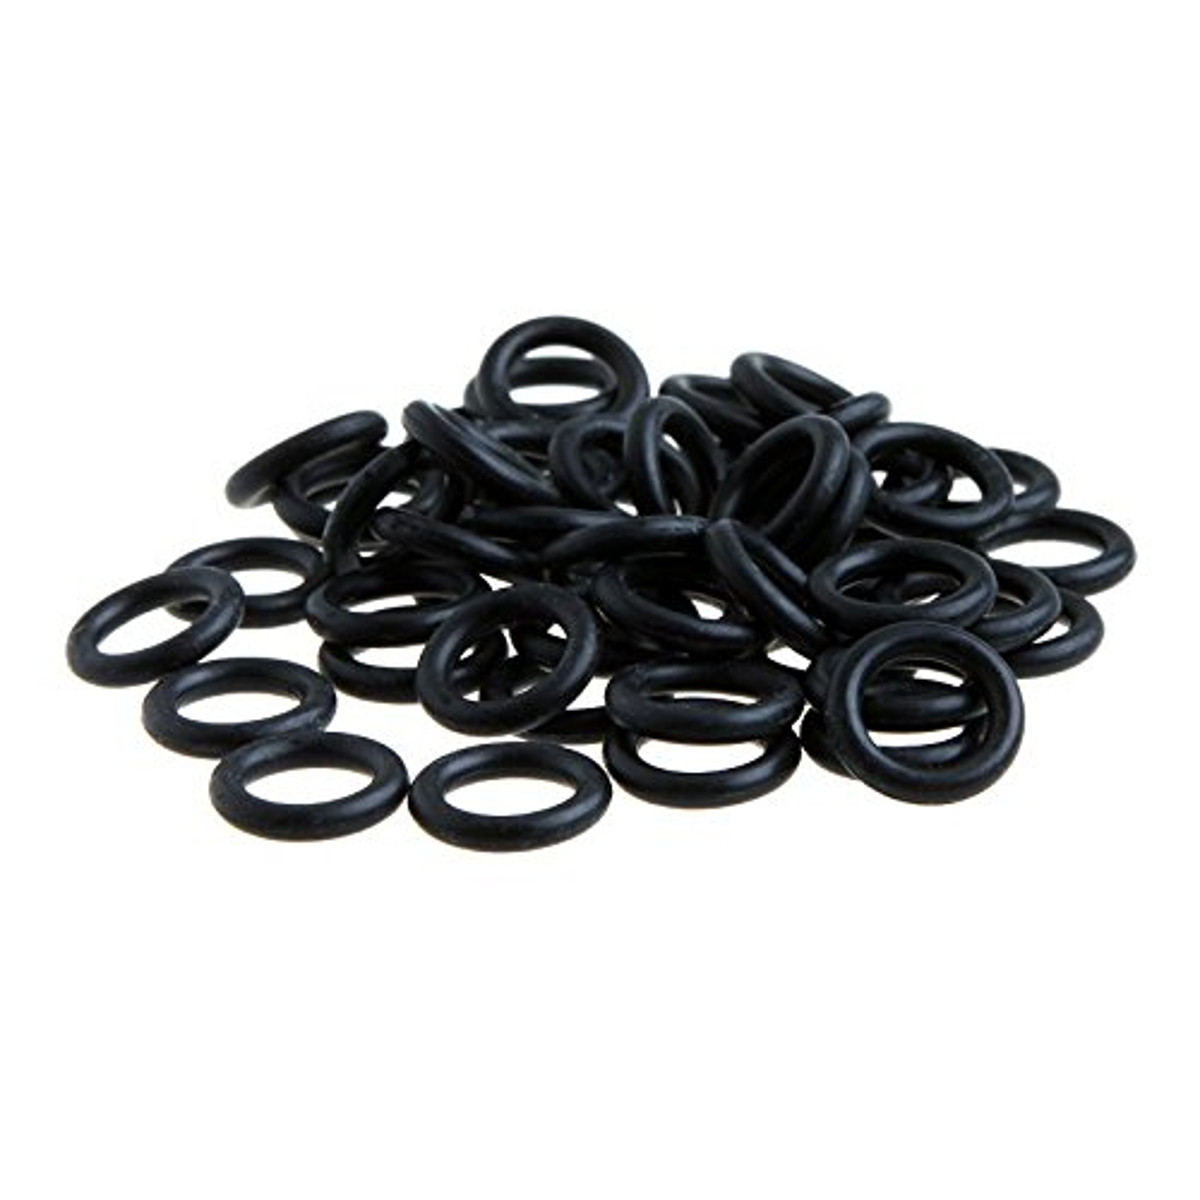 100 Mechanical Keyboard Keycap Rubber O-Ring Switch Dampeners for Cherry MX 53